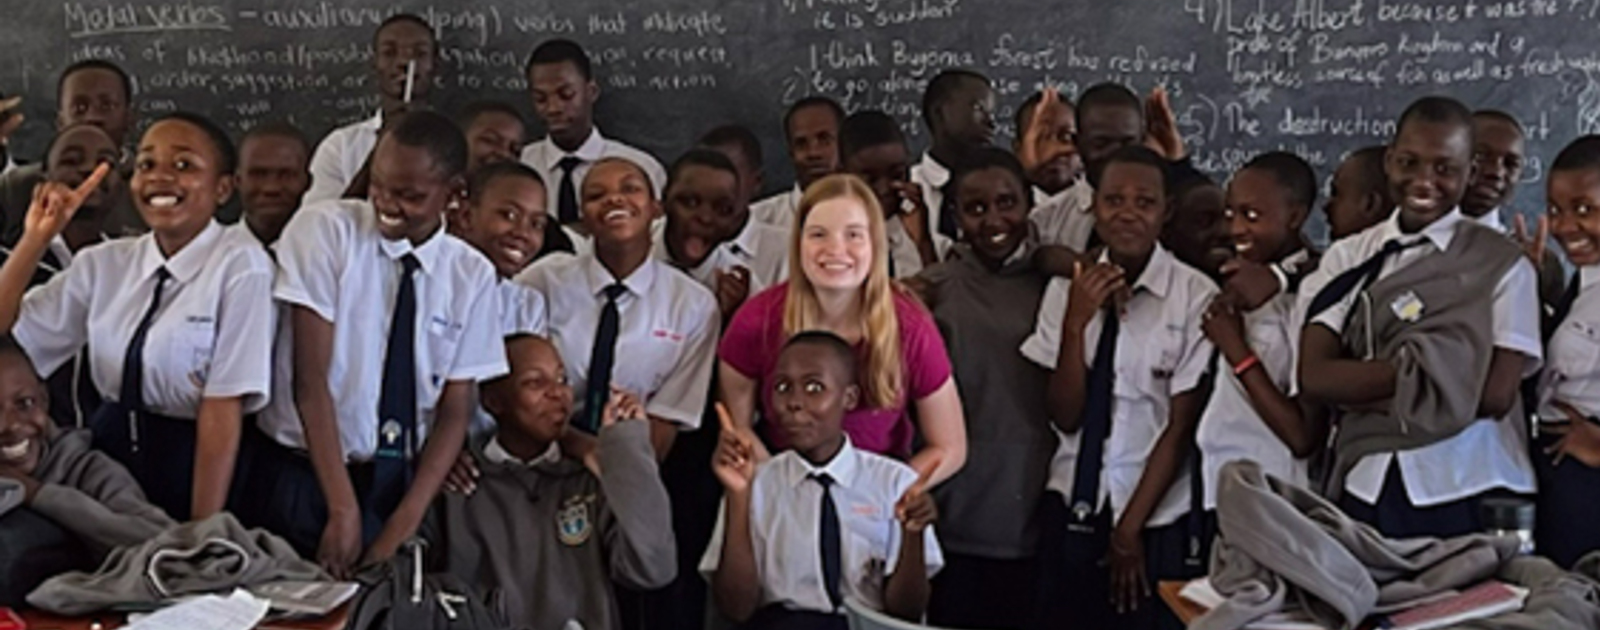 Notre Dame business student spends summer teaching and volunteering at a school for the disabled in Uganda |  News |  Notre Dame News